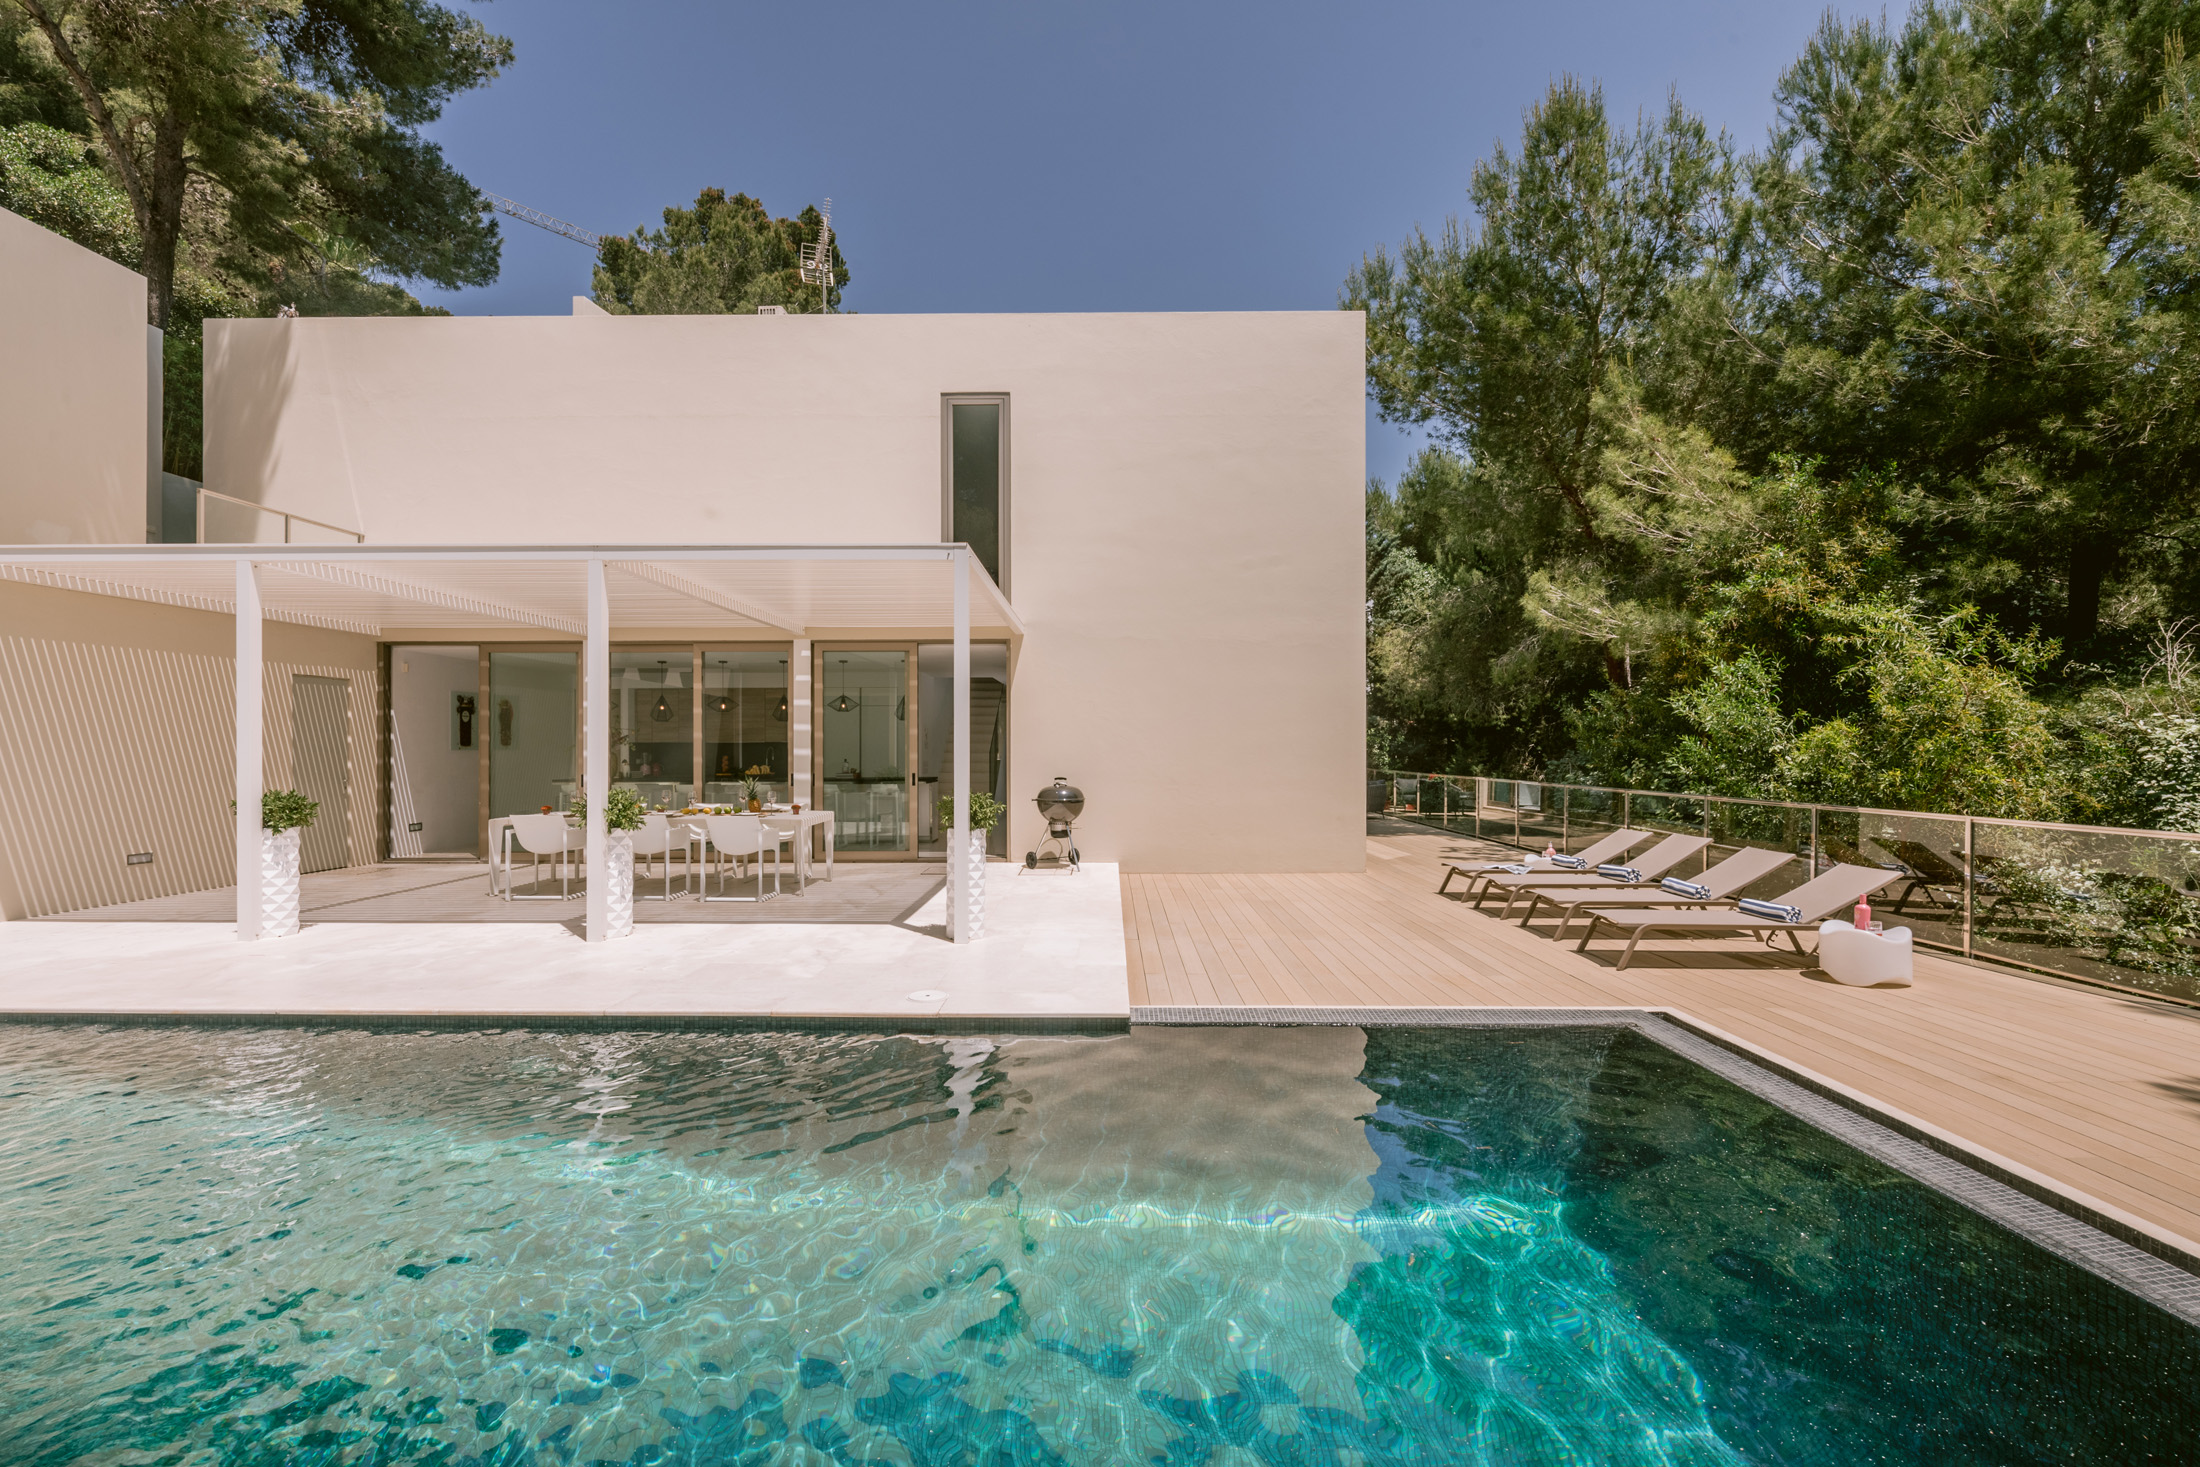 Central courtyard and swimming pool at Swimming pool at Can Furnet by Bruno Erpicum in Ibiza